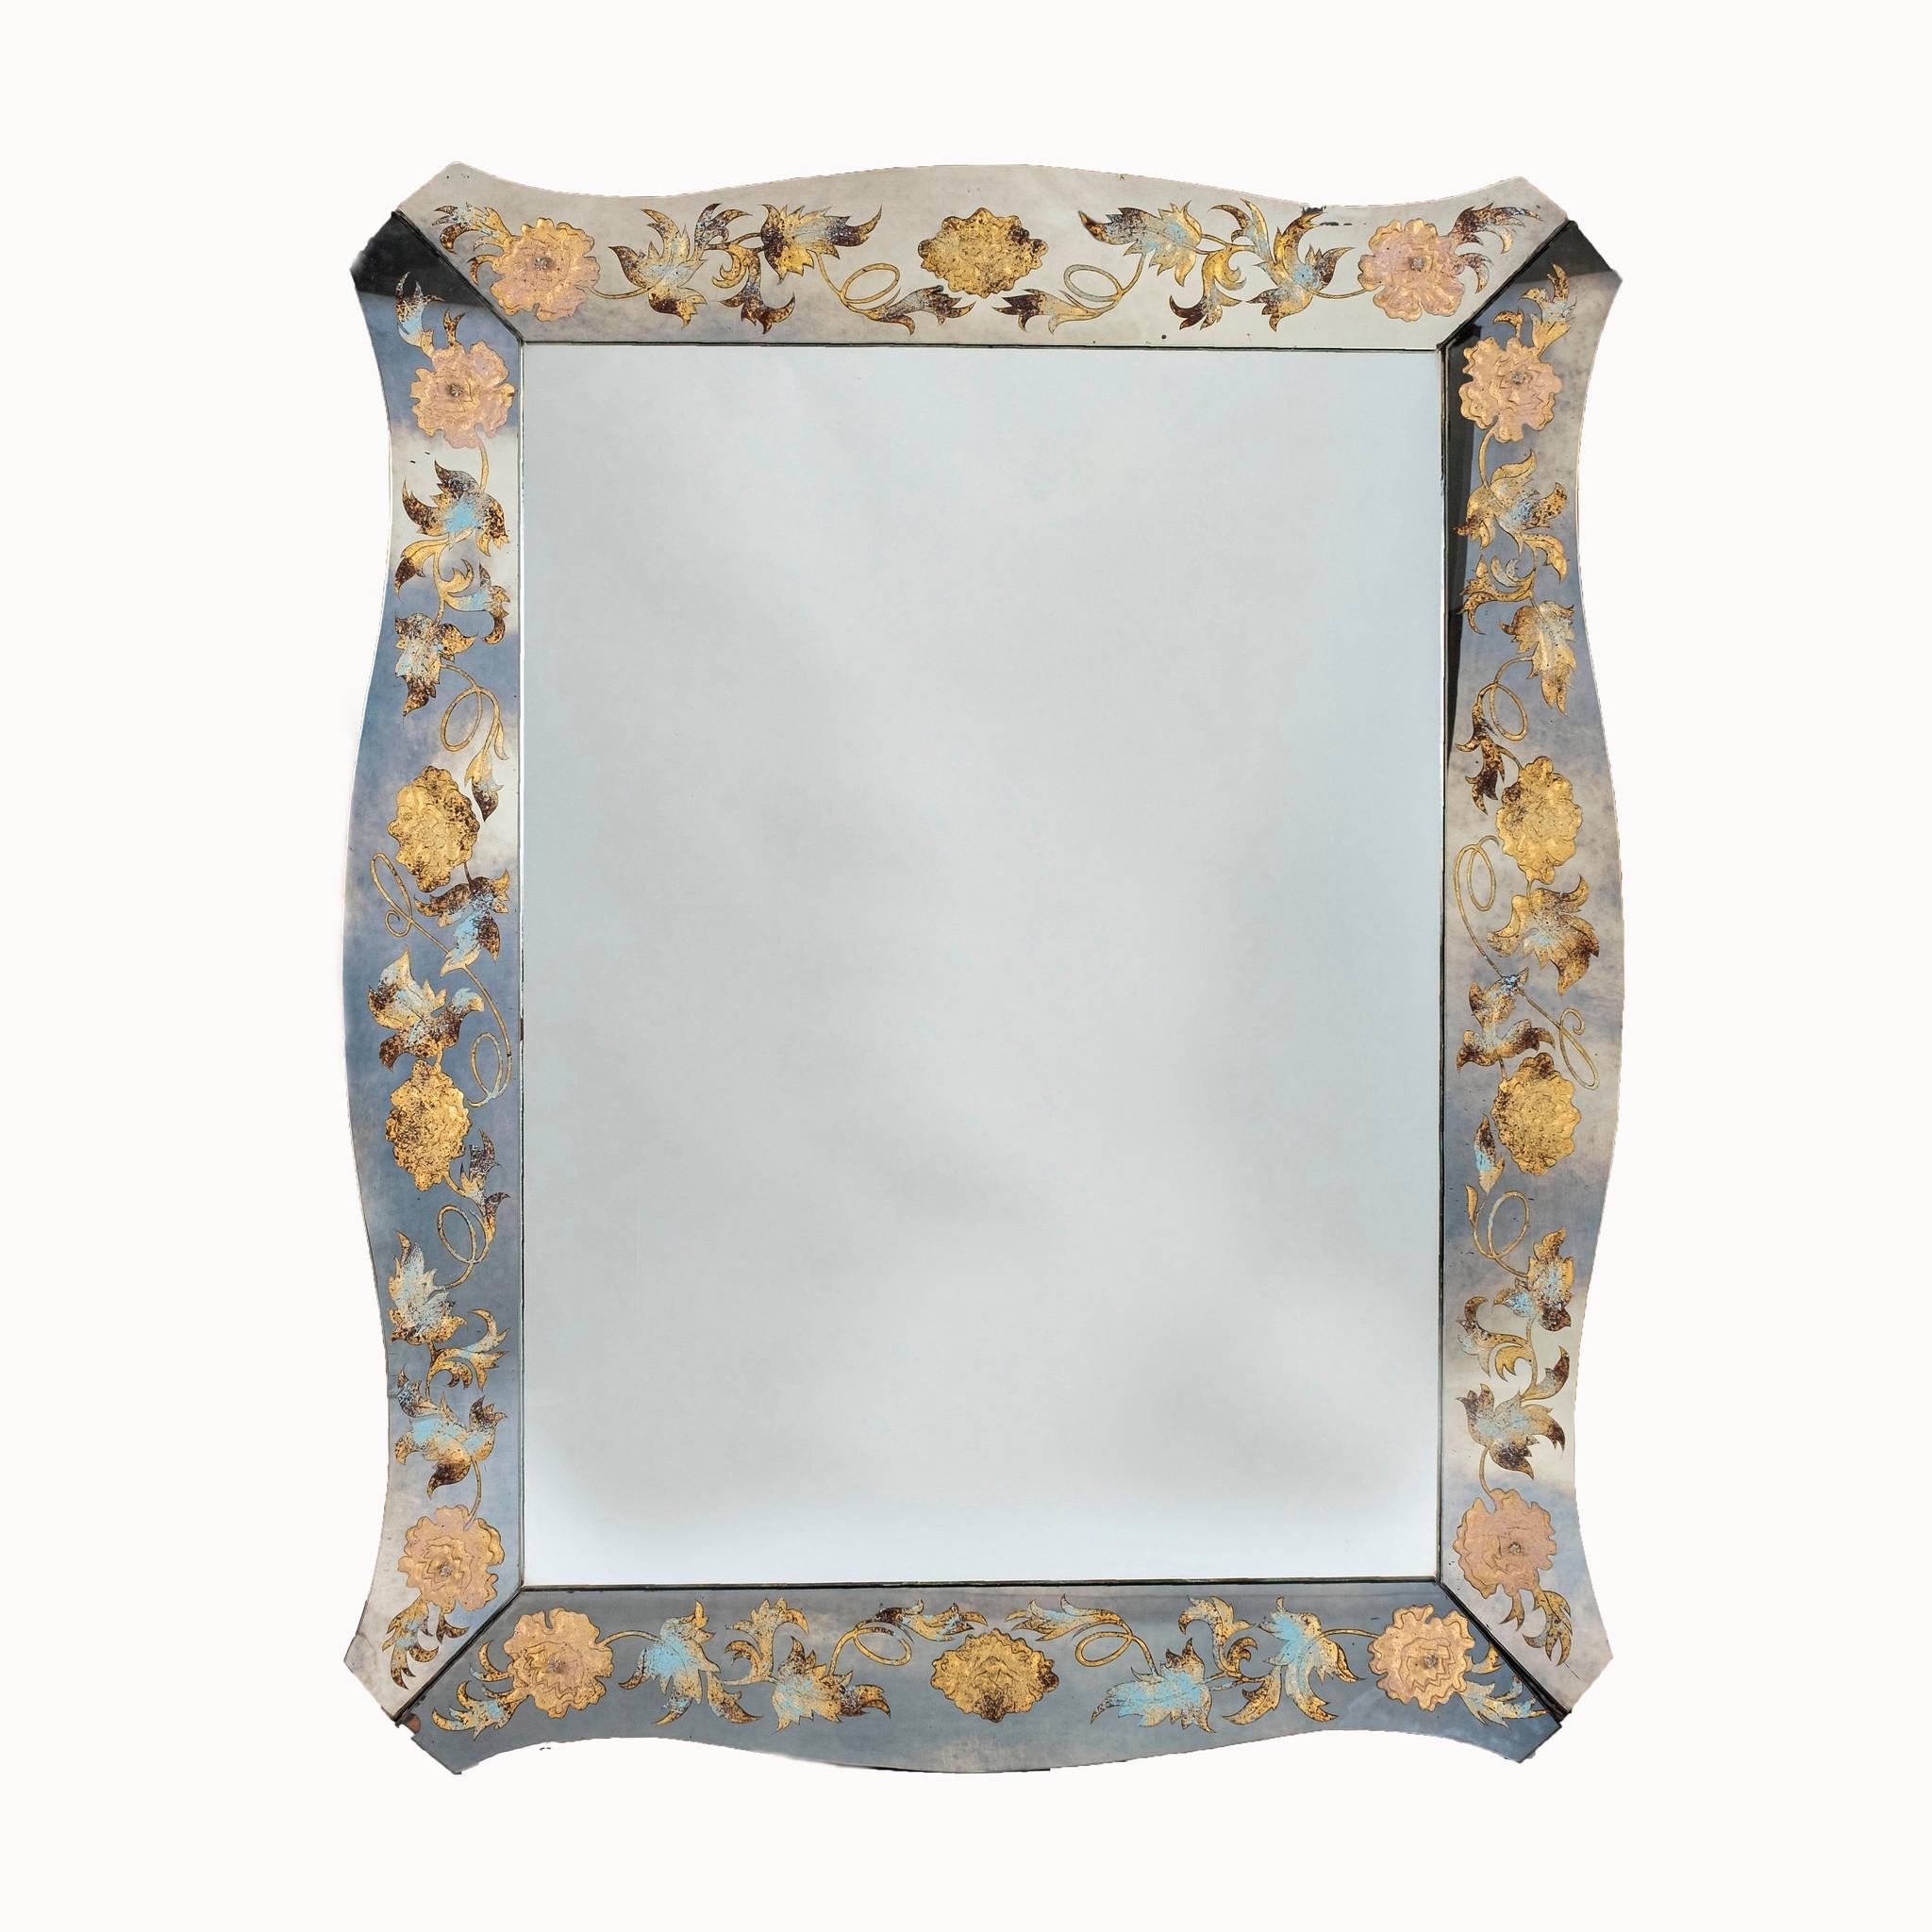 A large 1940s Venetian verre églomisé mirror with floral and vining detail. Soft blues and gold in coloring.